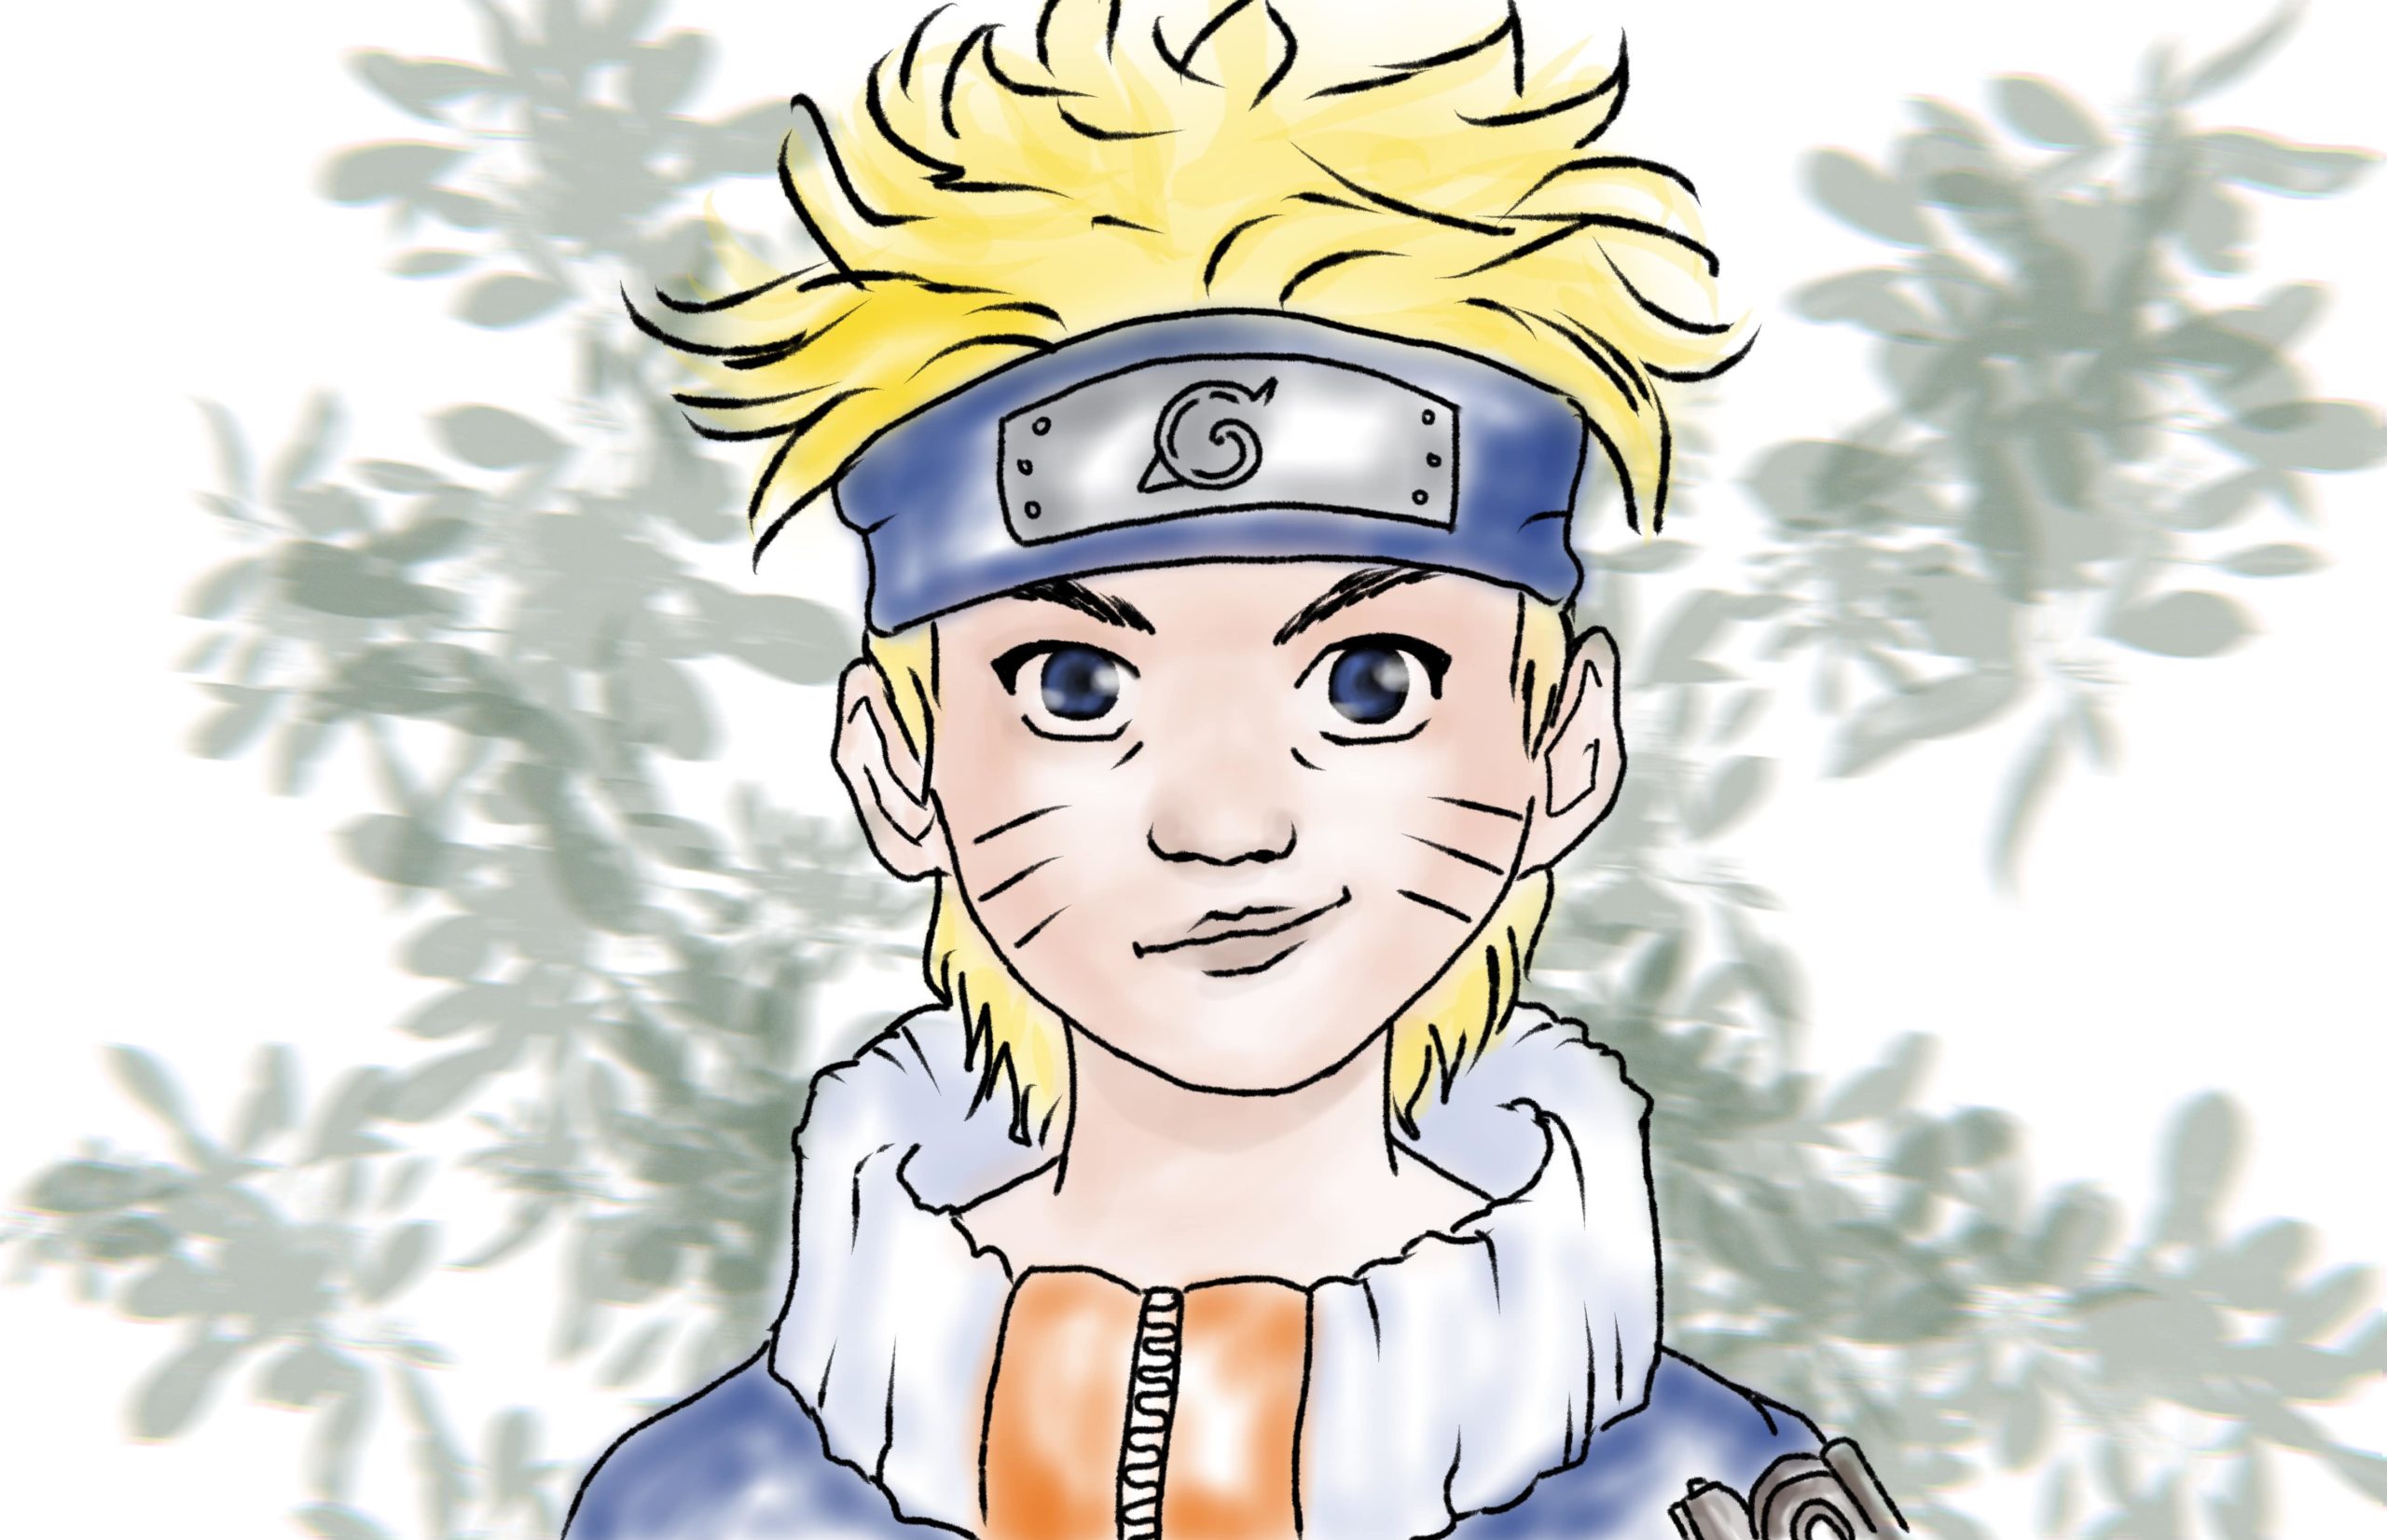 10 Awesome Naruto Fanfiction Stories to Read in 2023